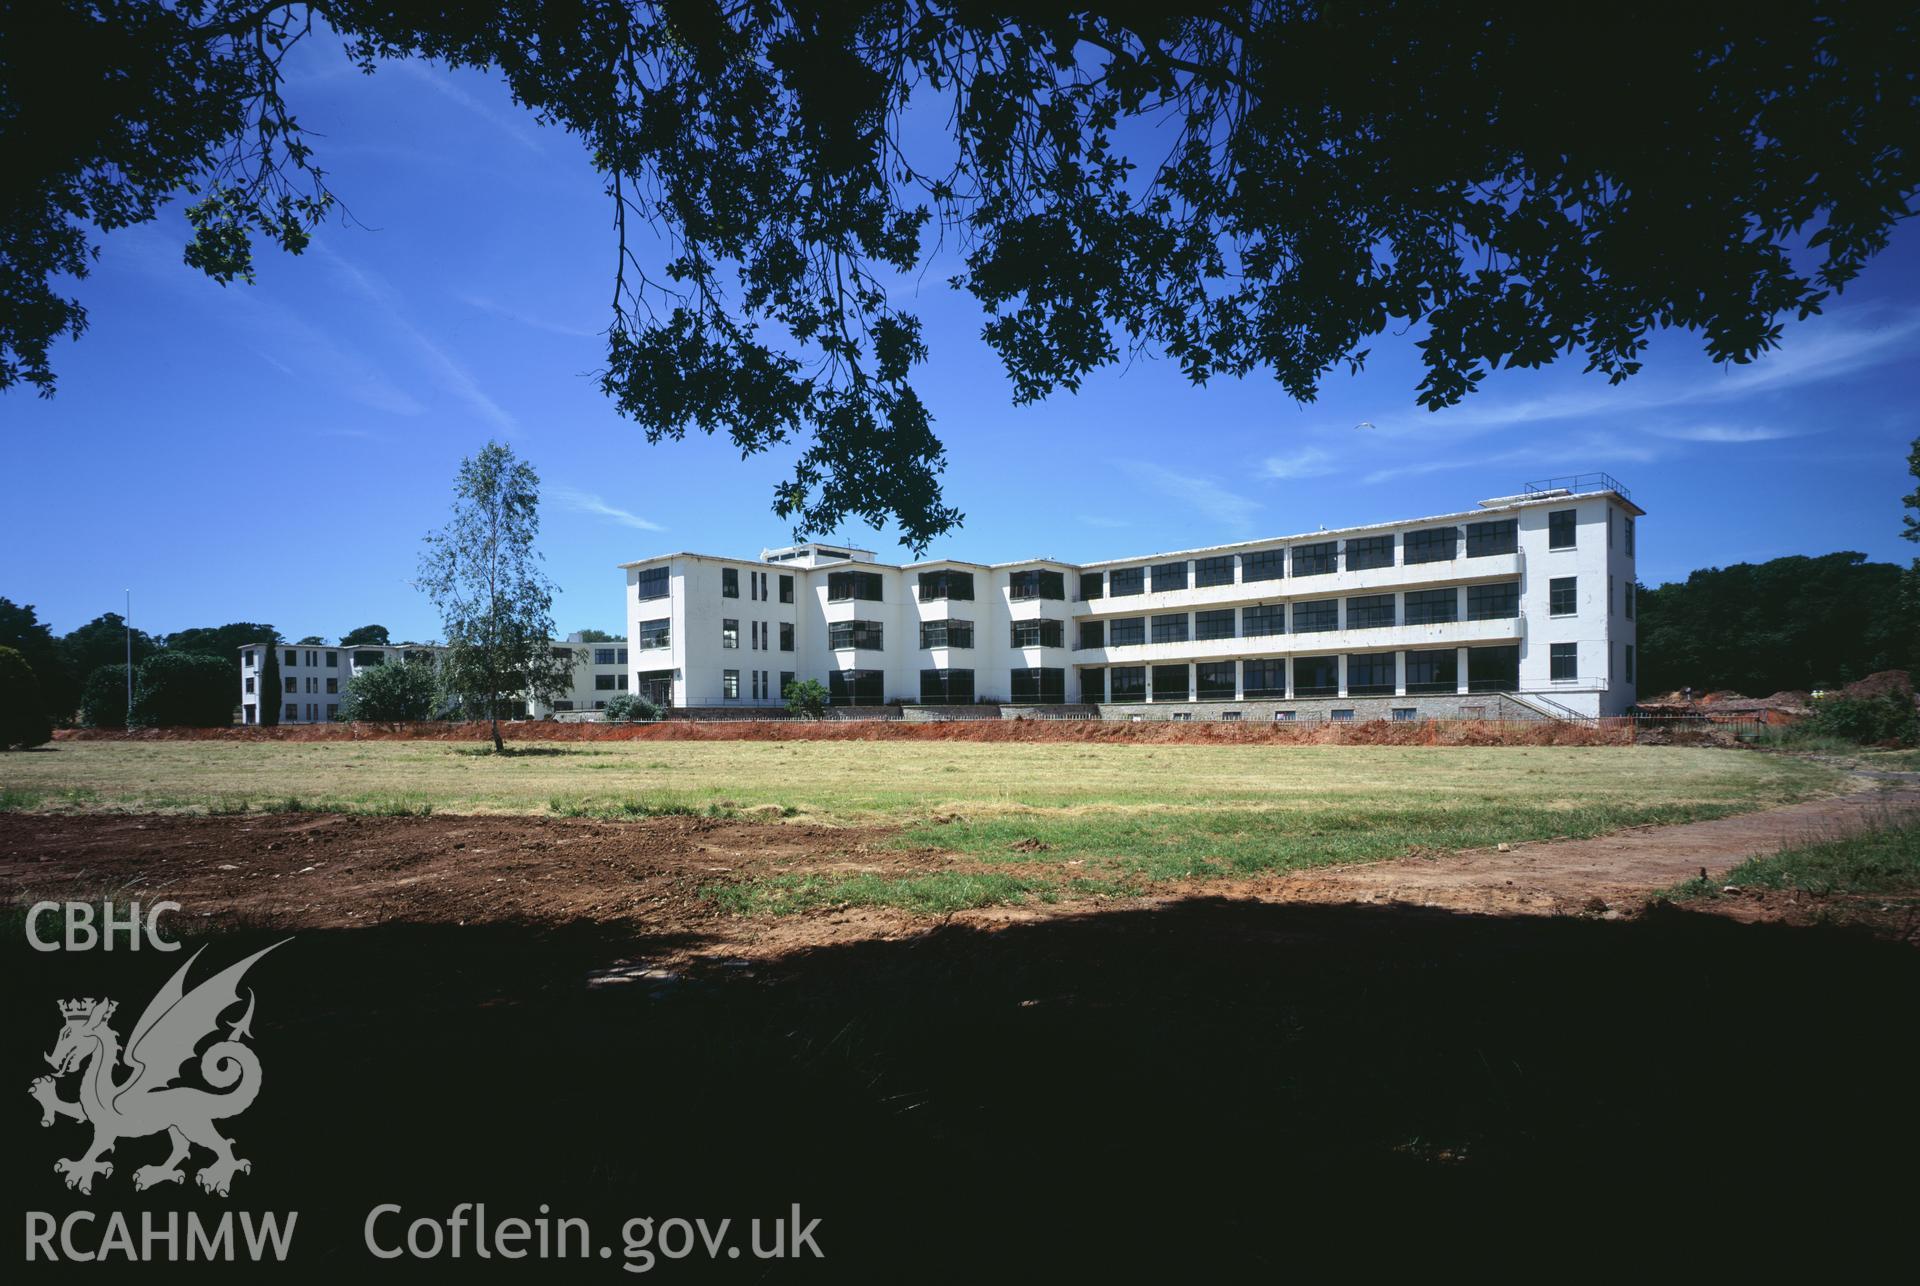 RCAHMW colour transparency showing Sully Hospital taken by I.N. Wright, June 2005